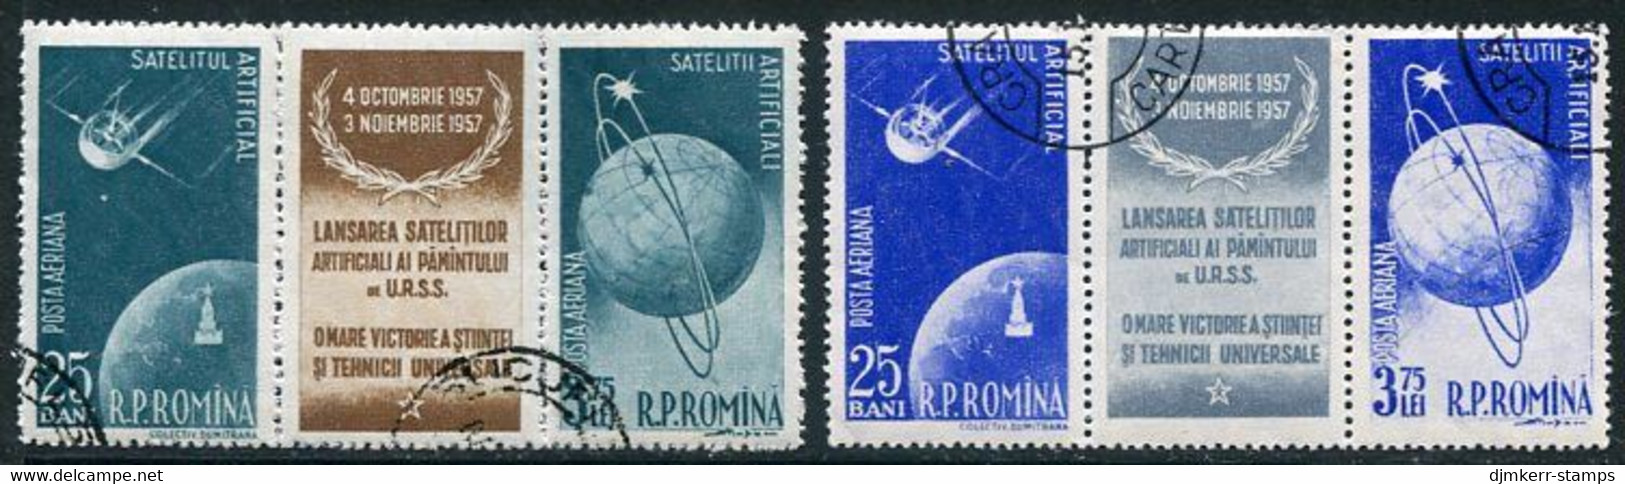 ROMANIA 1957 Launch Of First Earth Satellites Strips Used.  Michel 1677-80 - Oblitérés